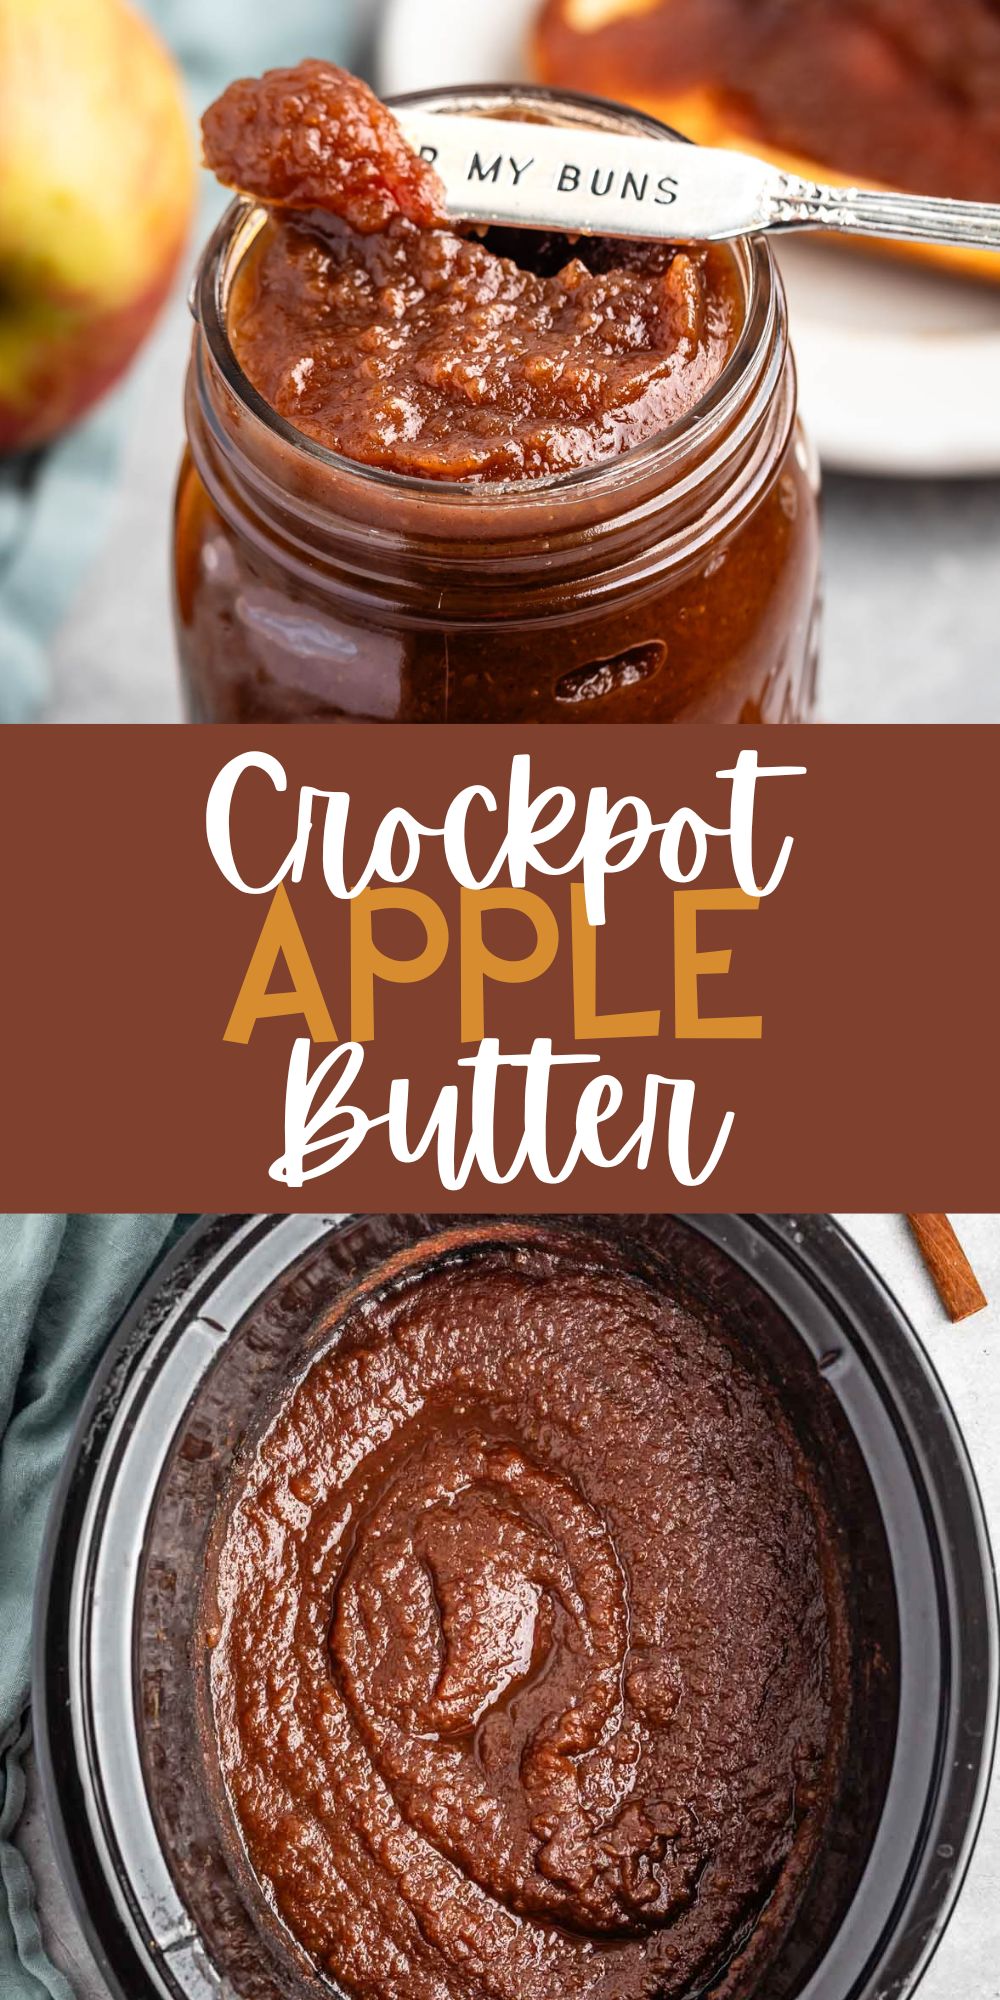 two photos of apple butter in a mason jar and crockpot with words on the image.